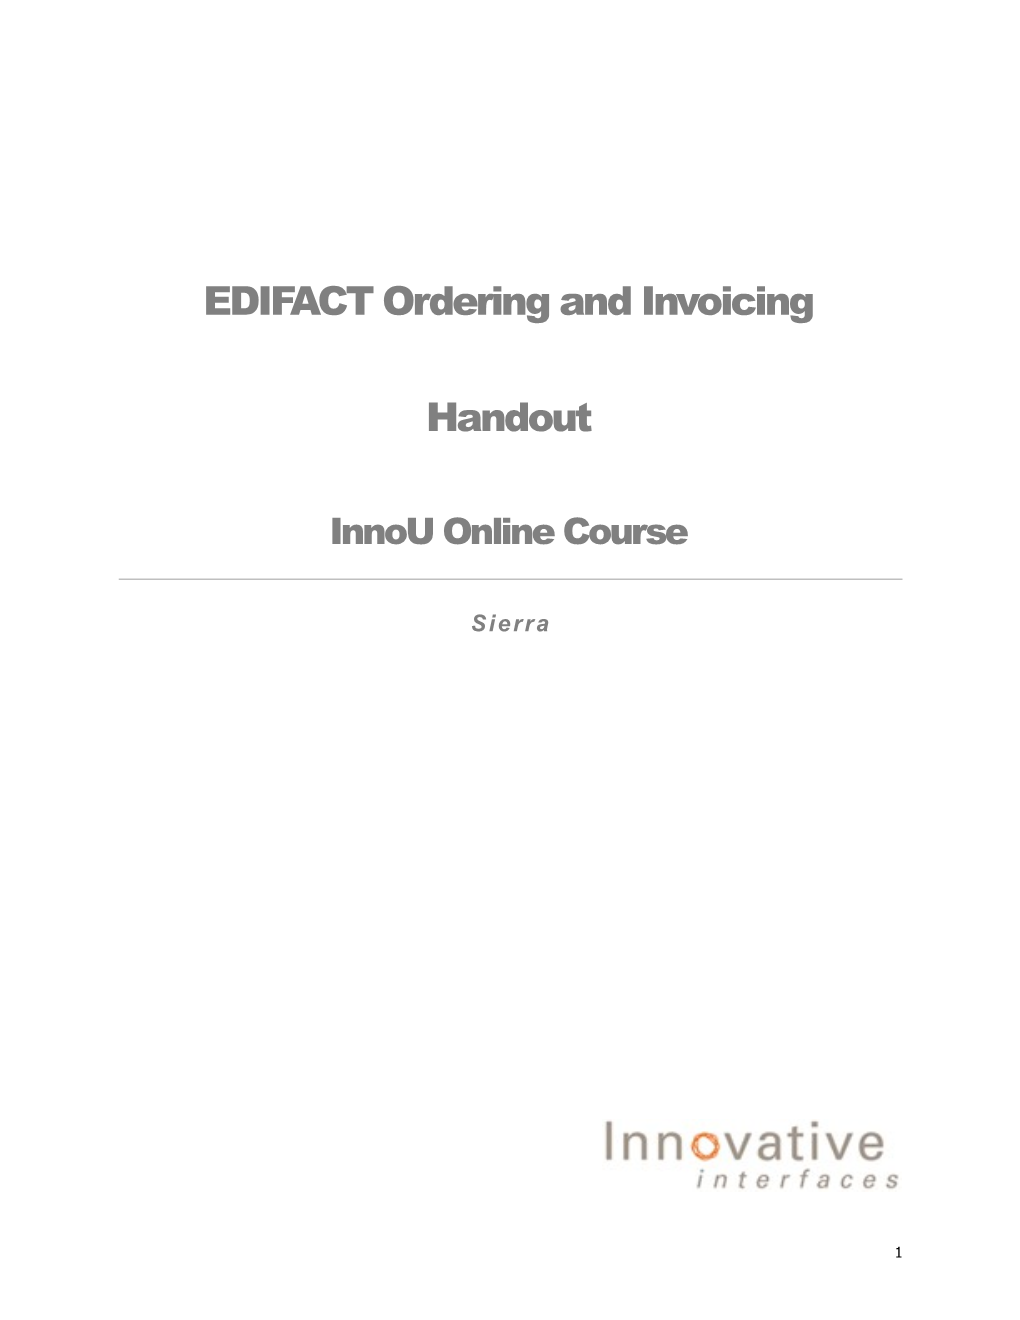 EDIFACT Ordering and Invoicing